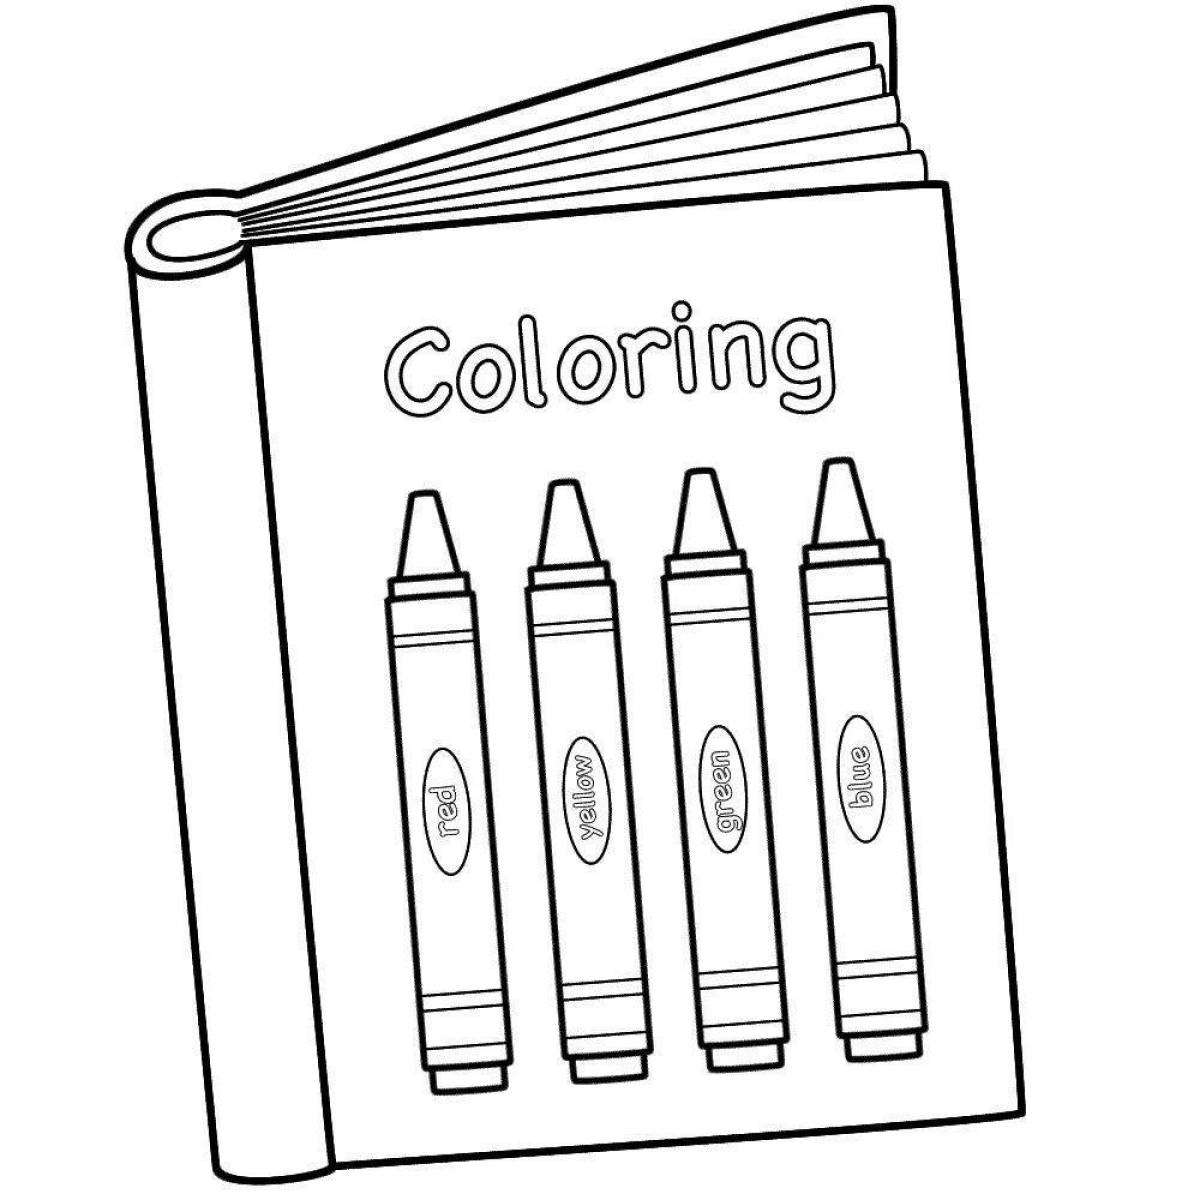 Coloring for children